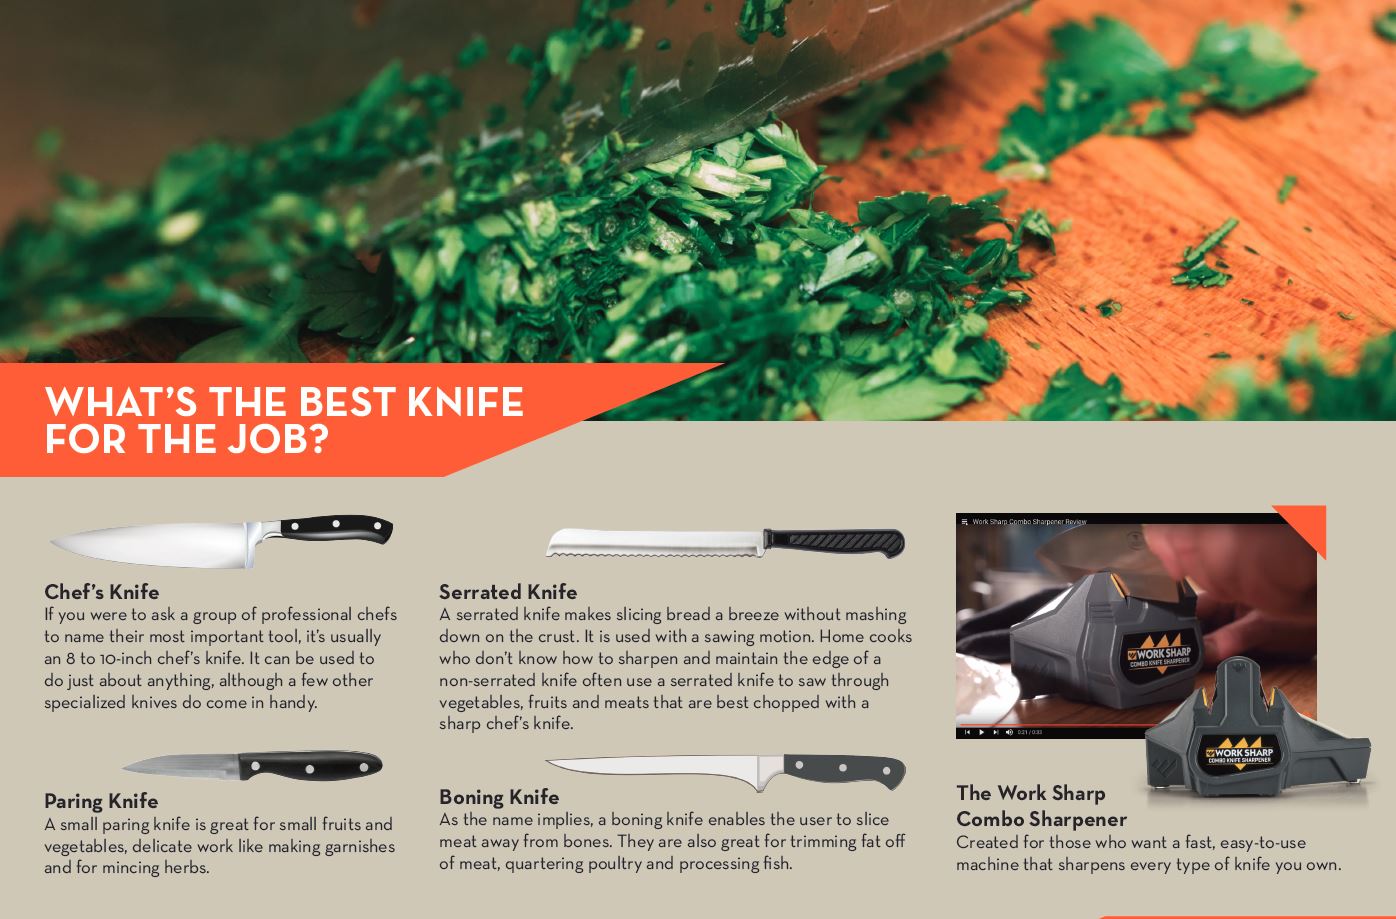 What’s The Best Knife For The Job?